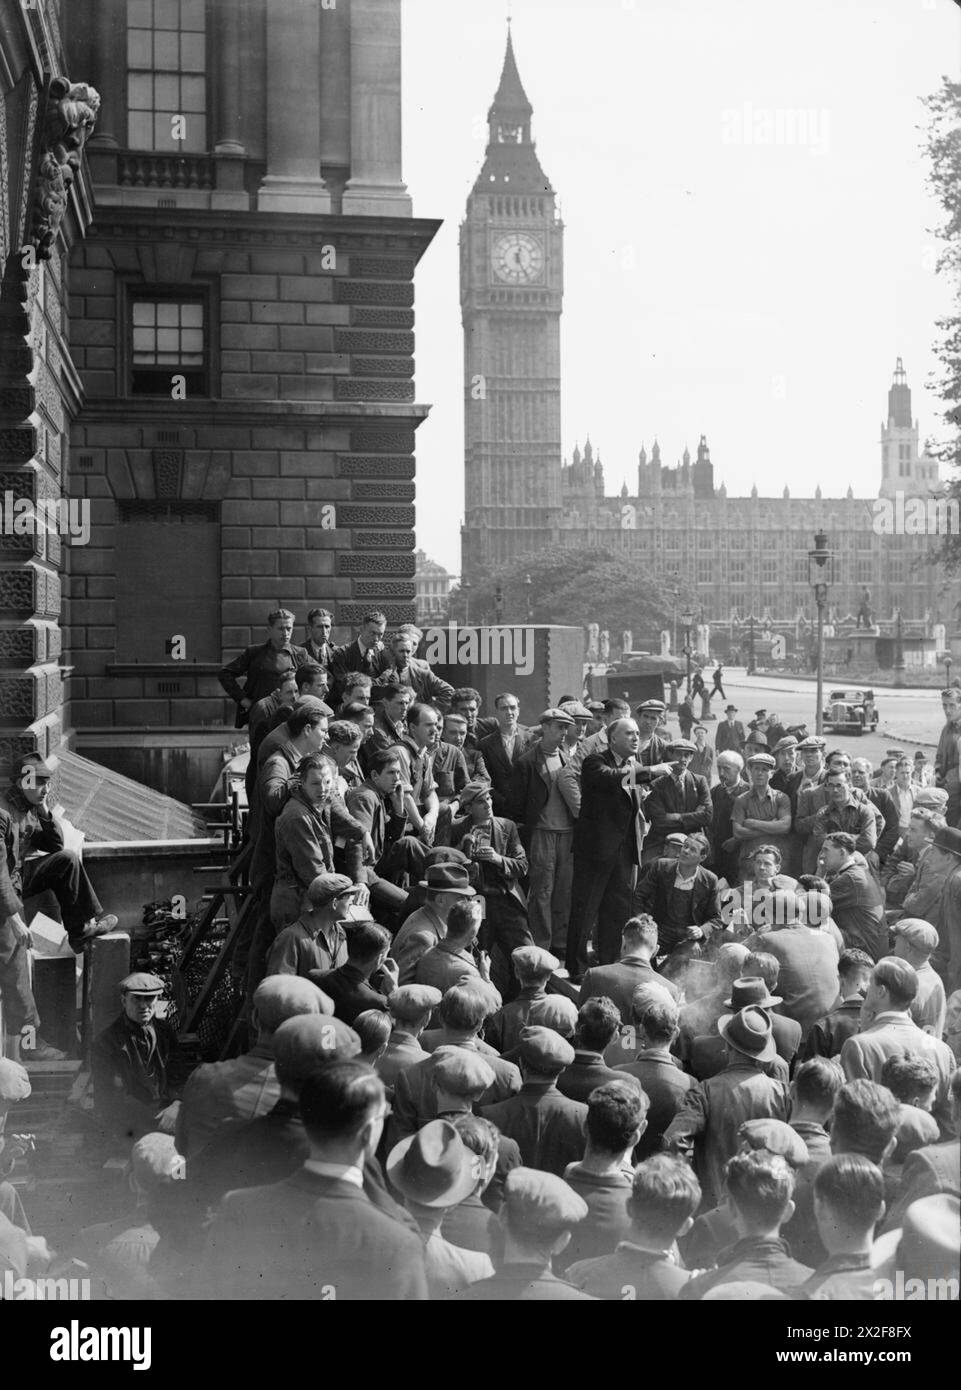 HARRY POLLITT SPEAKS AT WHITEHALL, LONDON, ENGLAND, 1941 - Harry Pollitt, General Secretary of the Communist Party of Great Britain, gives a speech to workers in Whitehall, London, 1941. Big Ben can be clearly seen behind him Pollitt, Harry Stock Photo